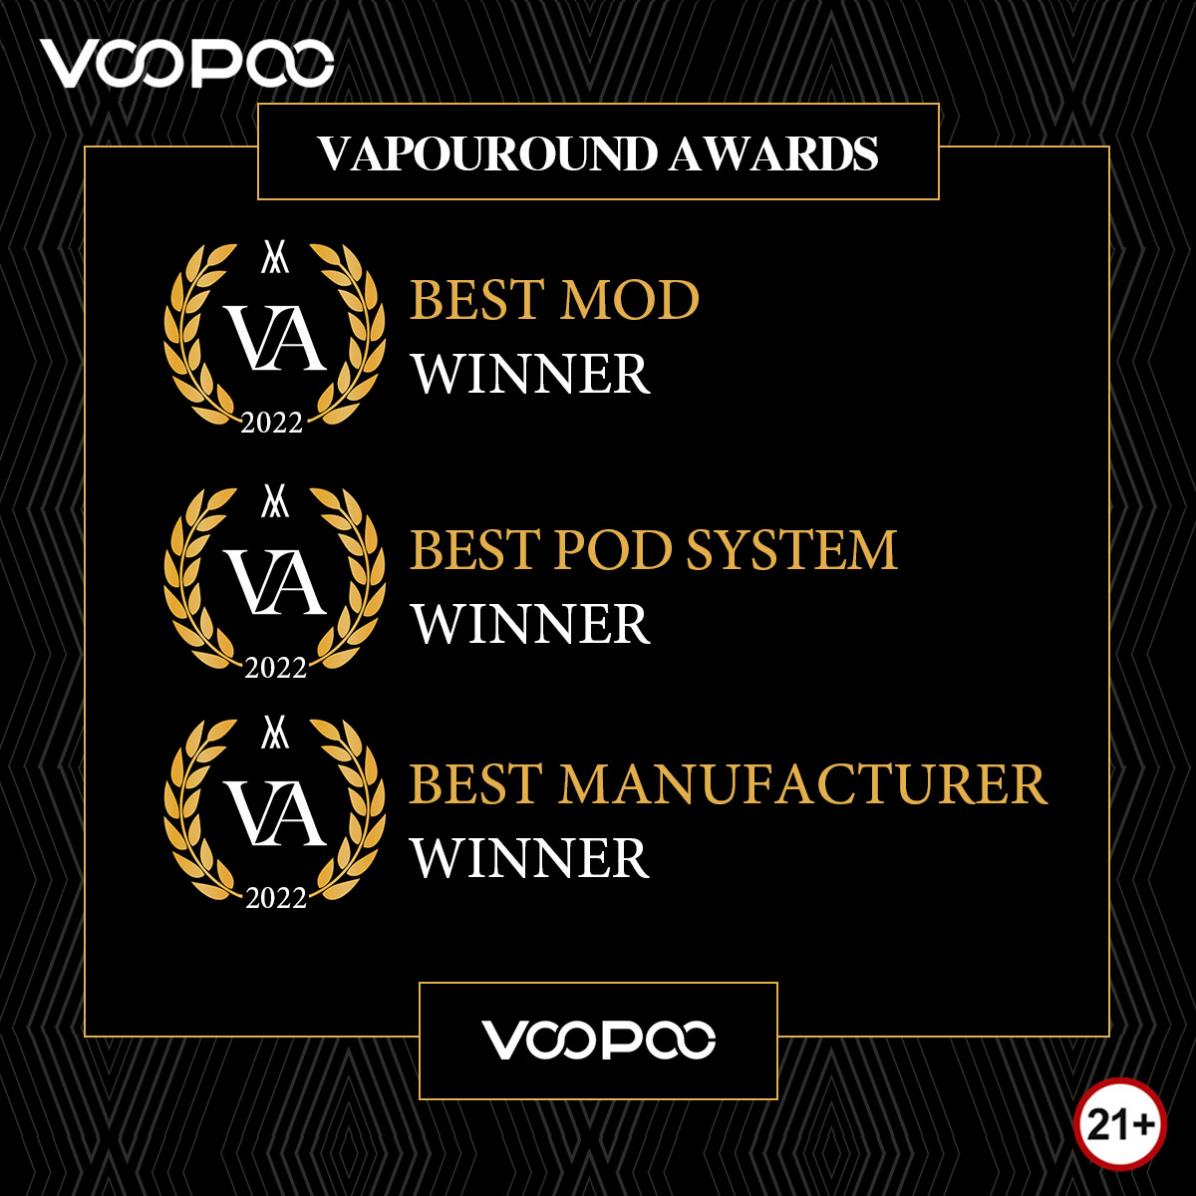 Reaching new heights, VOOPOO won 3 awards at the SEVENTH ANNUAL VAPOUROUND AWARDS